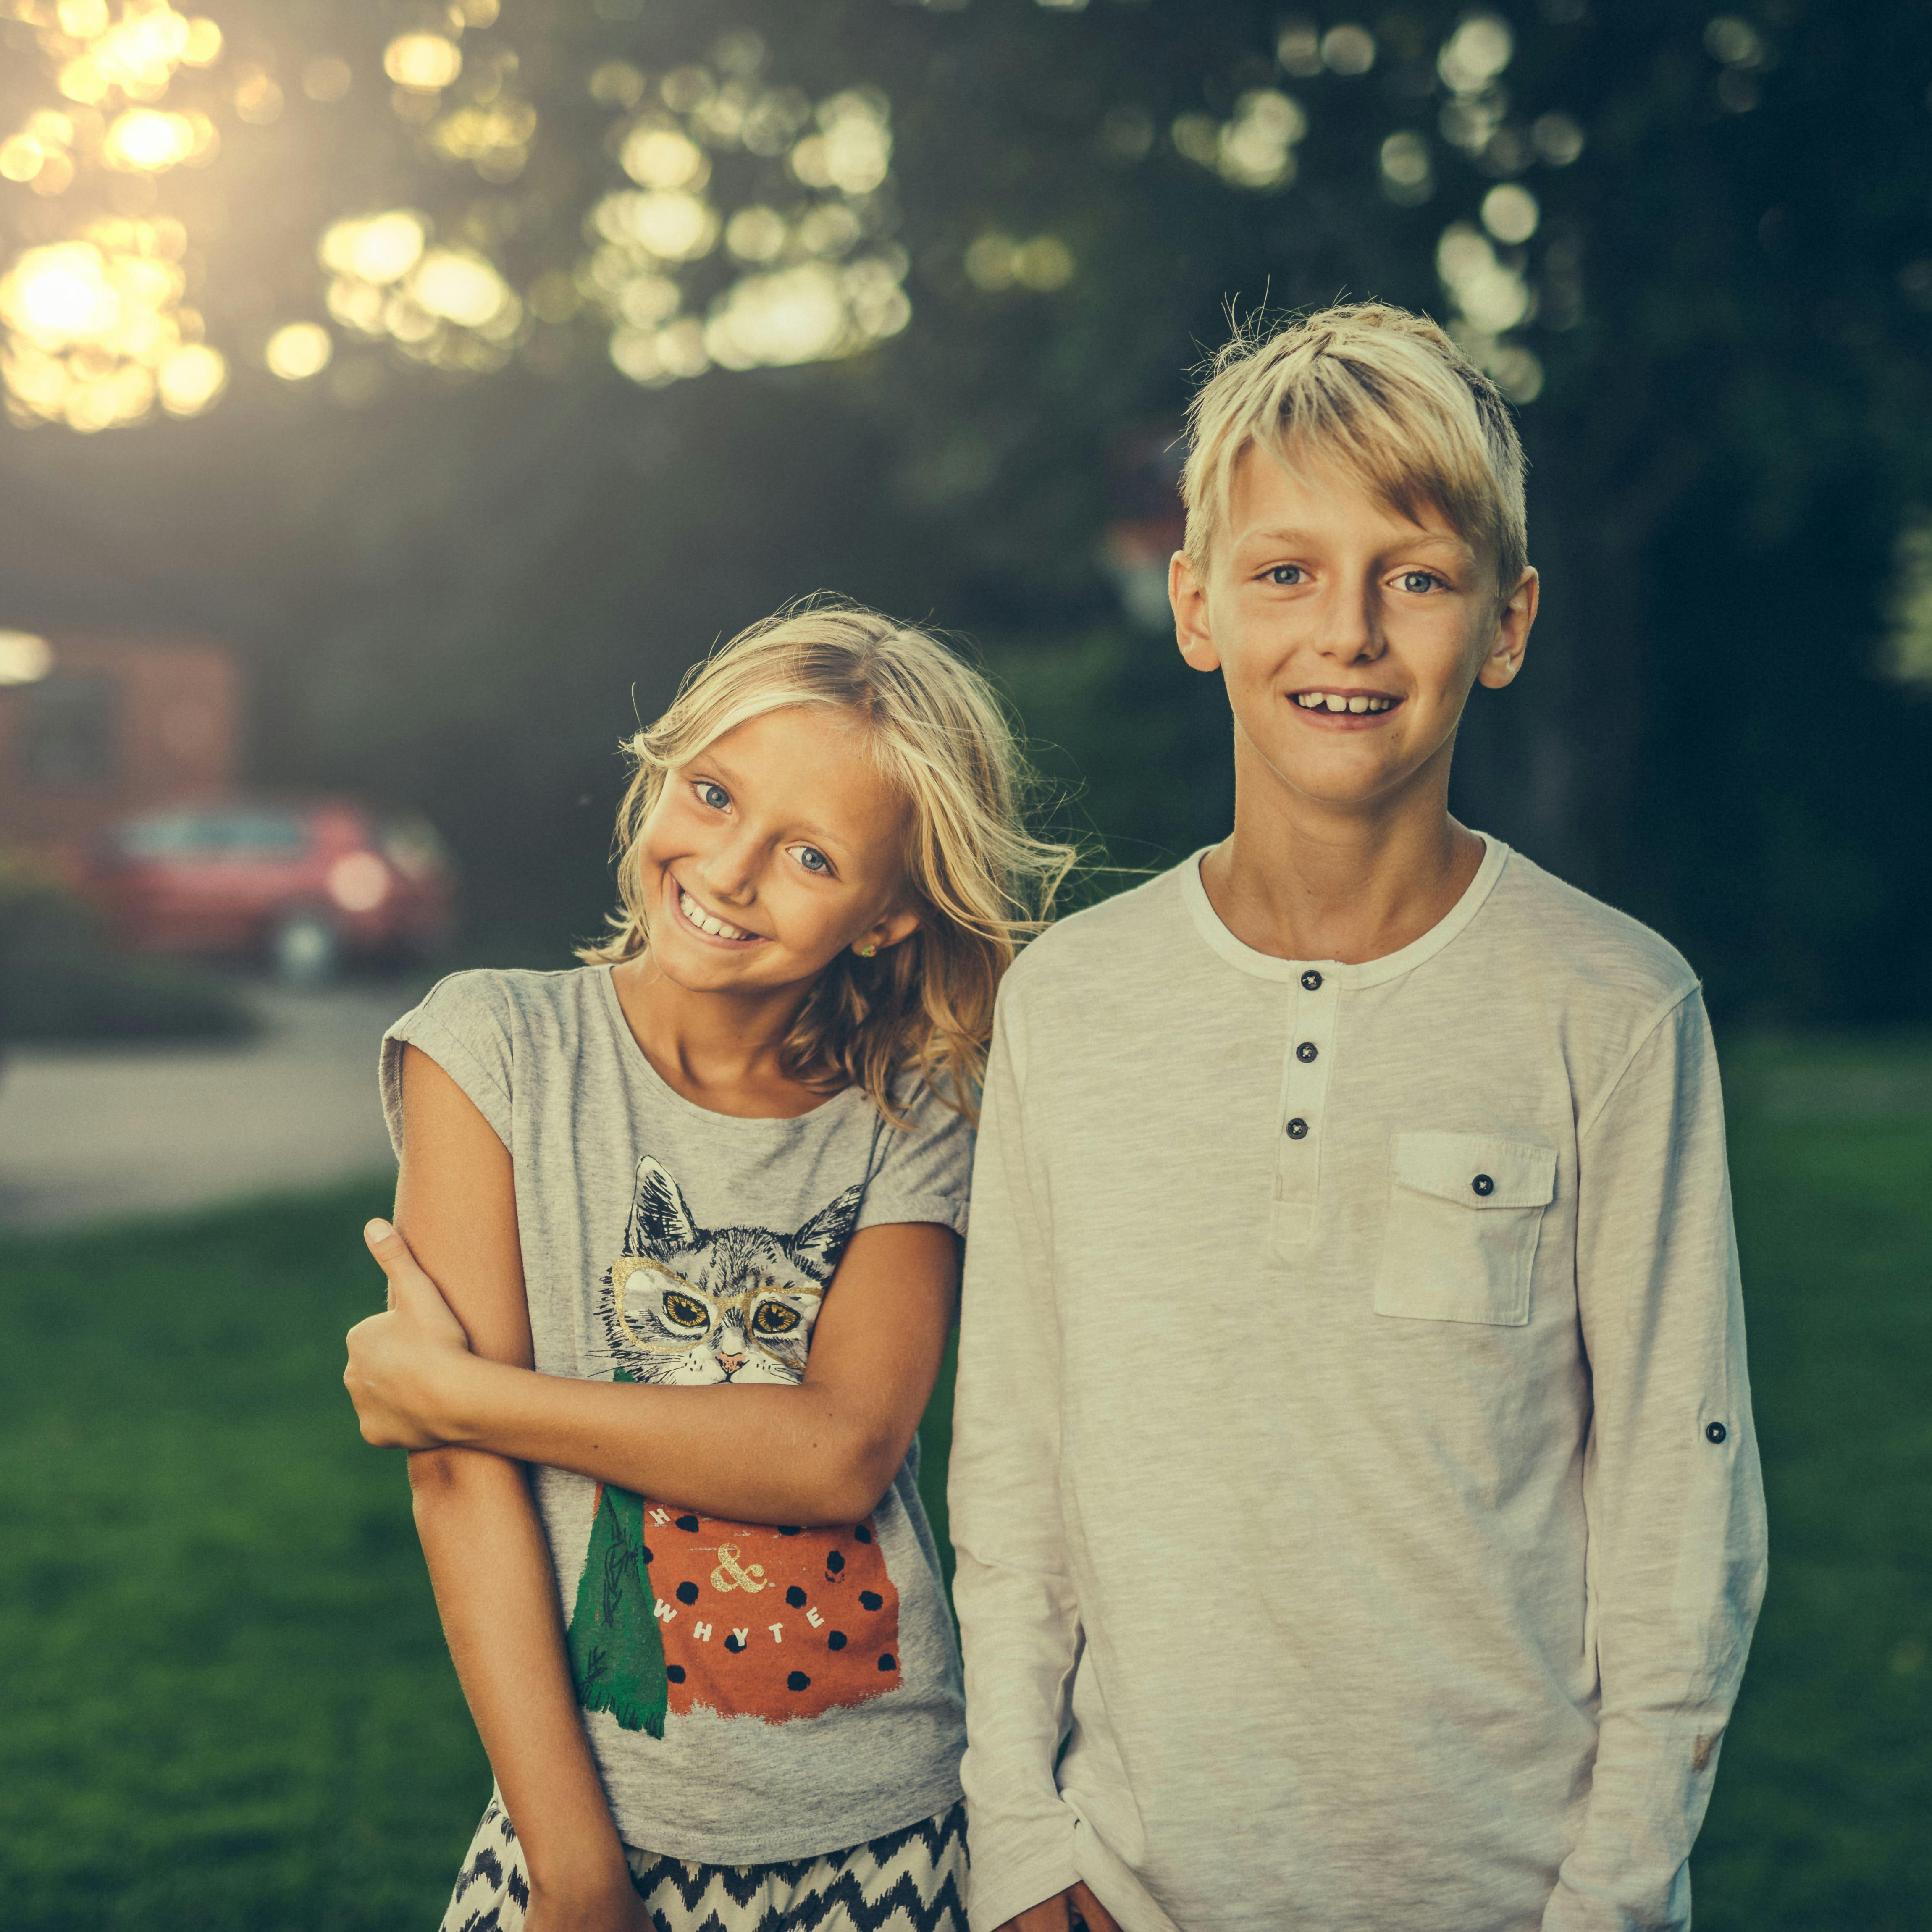 A brother and sister smiling while standing side-by-side | Source: Pexels